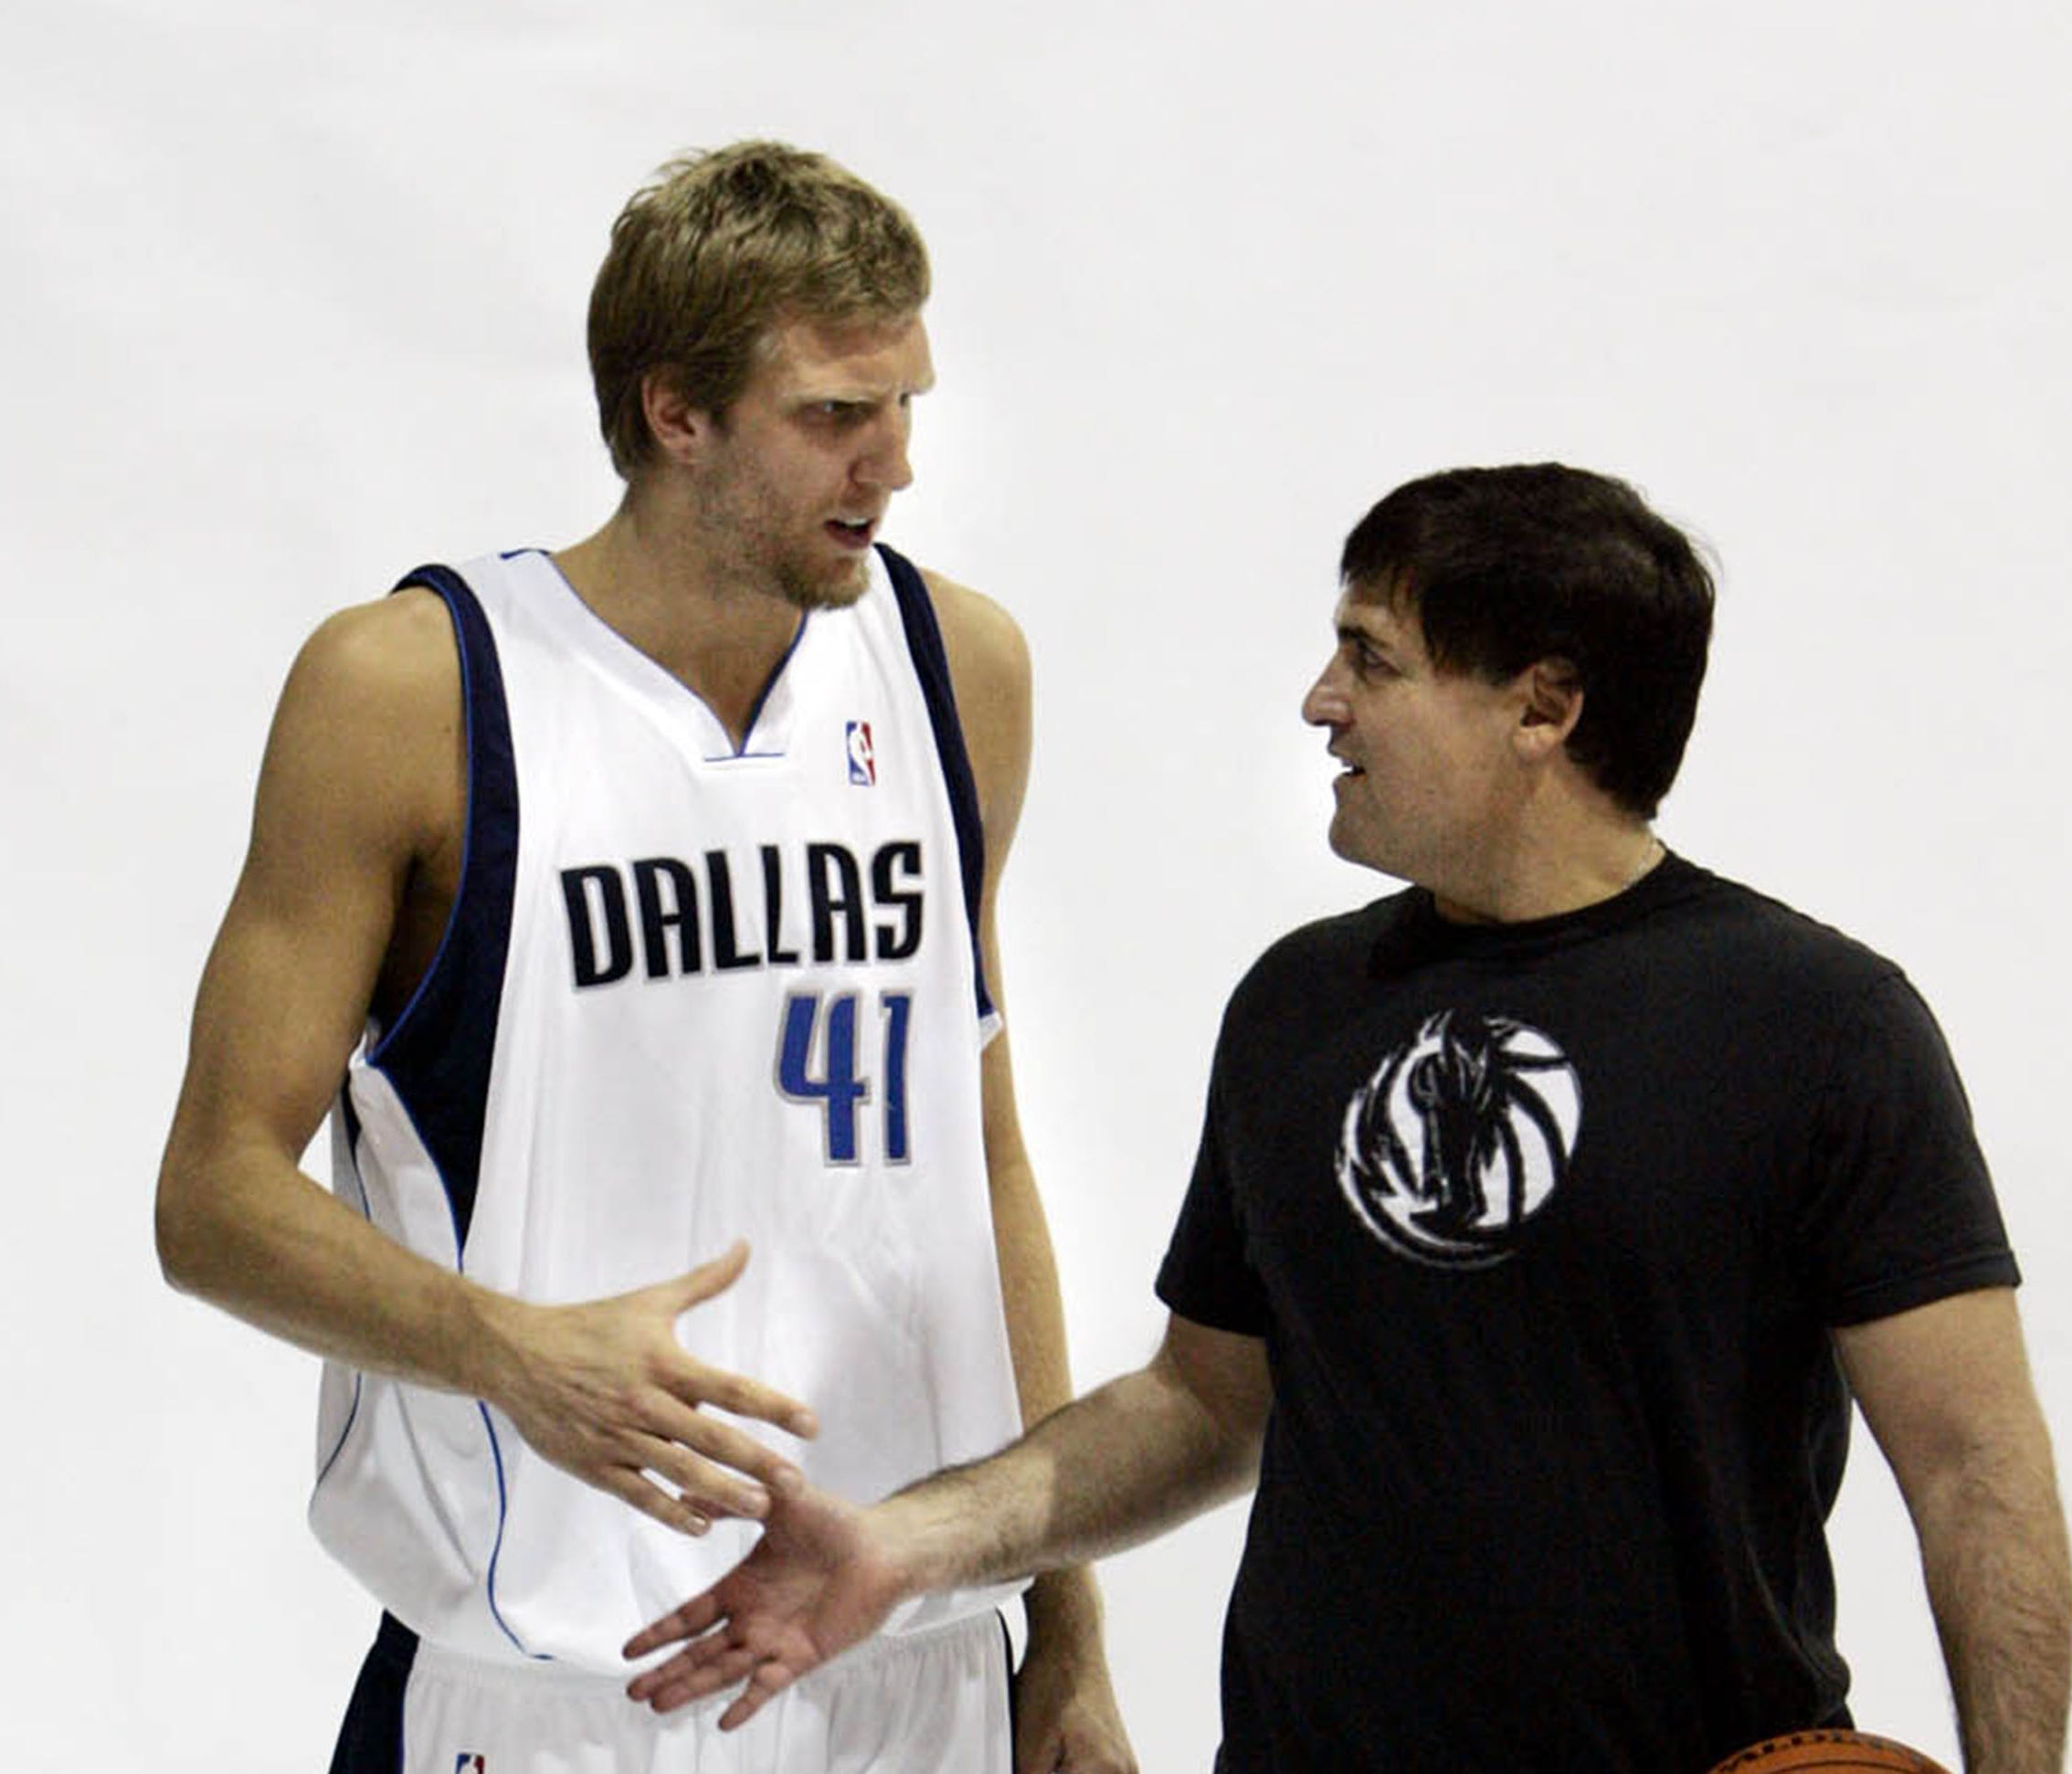 Dallas Mavericks Dirk Nowitzki, left, of Germany, and team owner Mark Cuban shake hands after posing for the team photographer during media day in Dallas, Monday, Oct. 2, 2006. (AP Photo/LM Otero) ORG XMIT: TXLM104